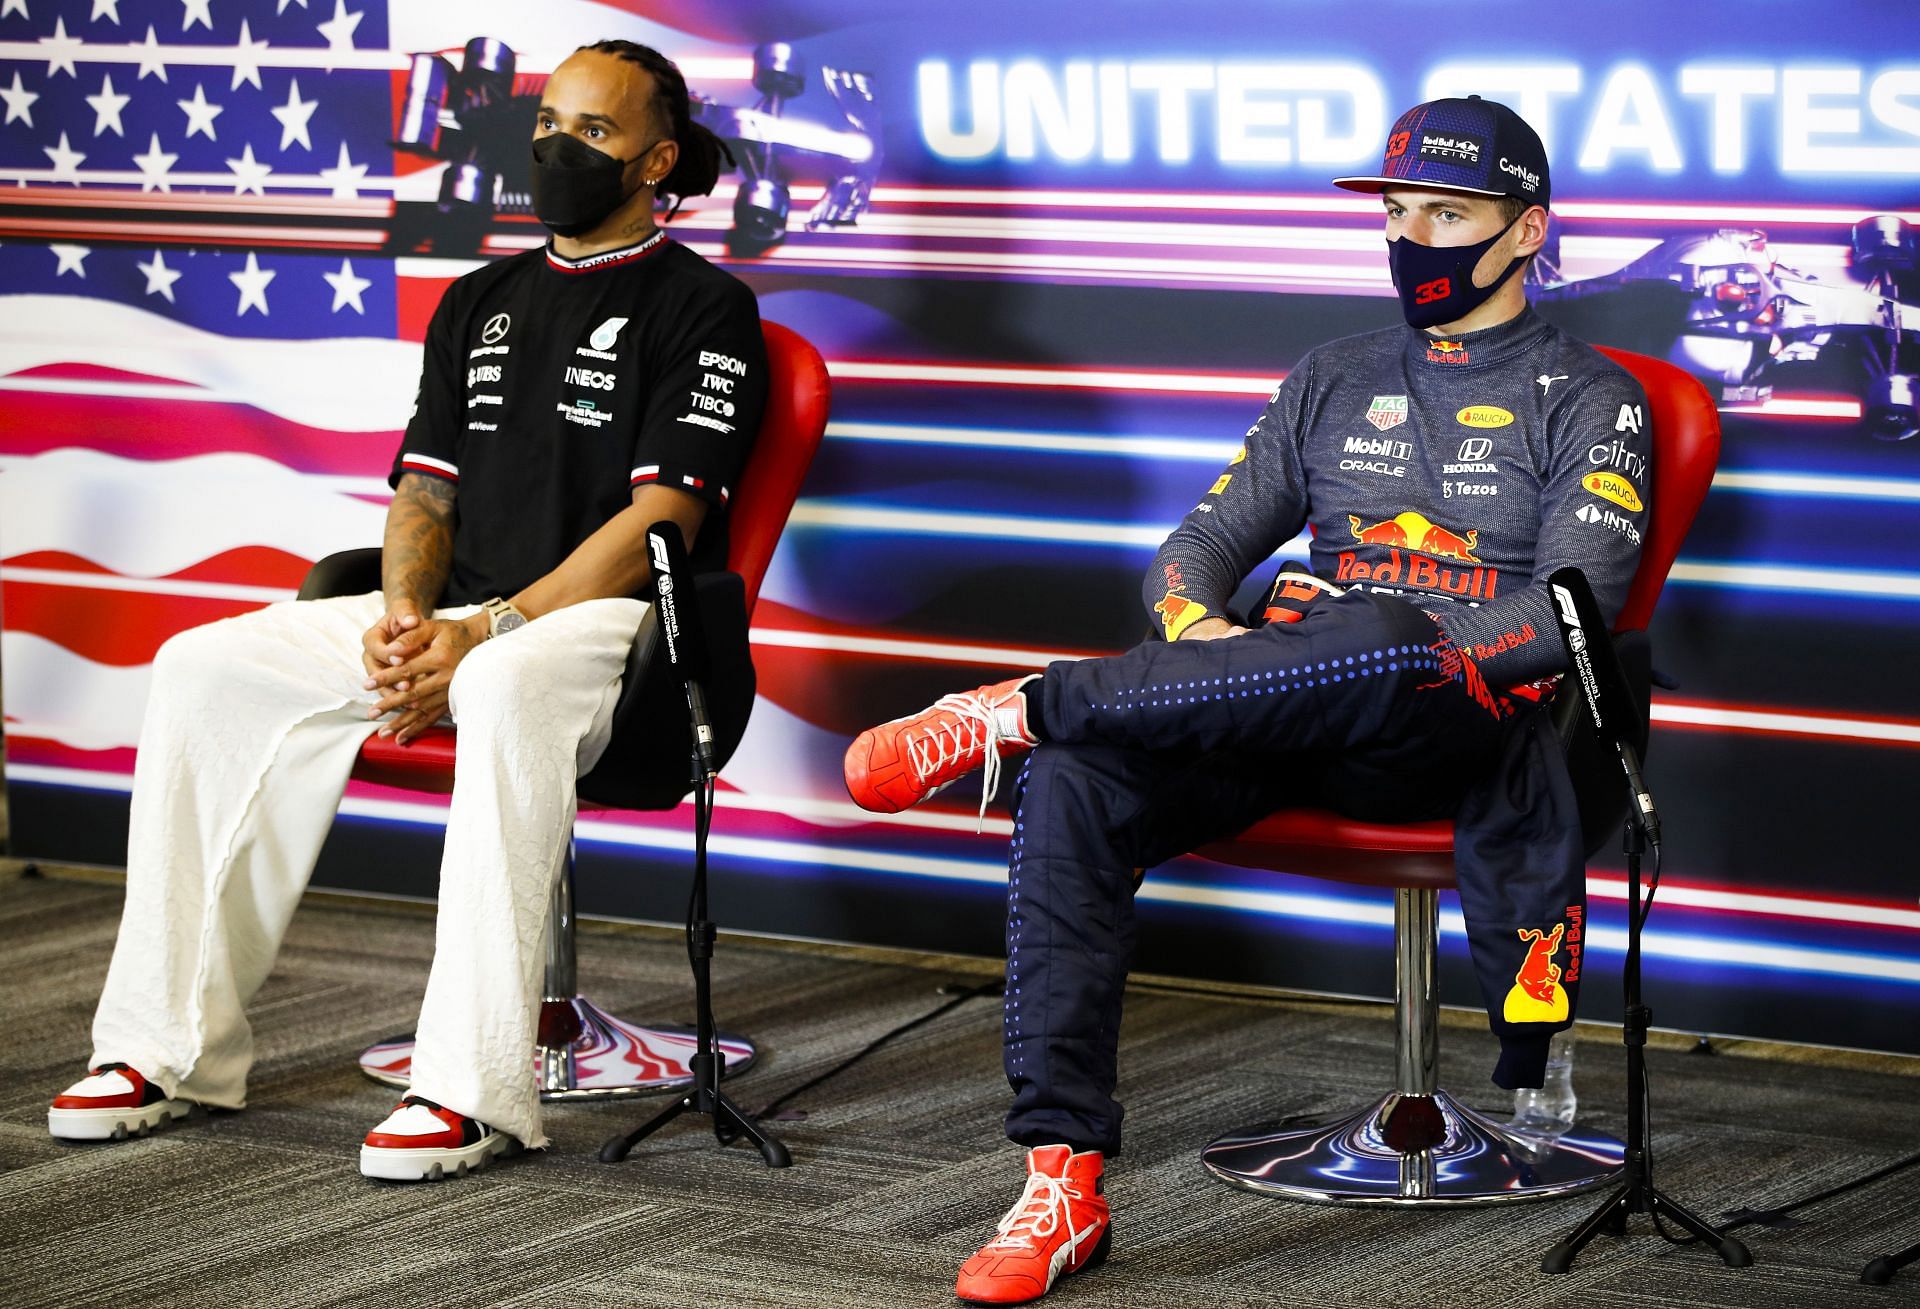 Lewis Hamilton (left) and Max Verstappen (right) at the Circuit of the Americas (Photo by Zak Mauger - Pool/Getty Images)